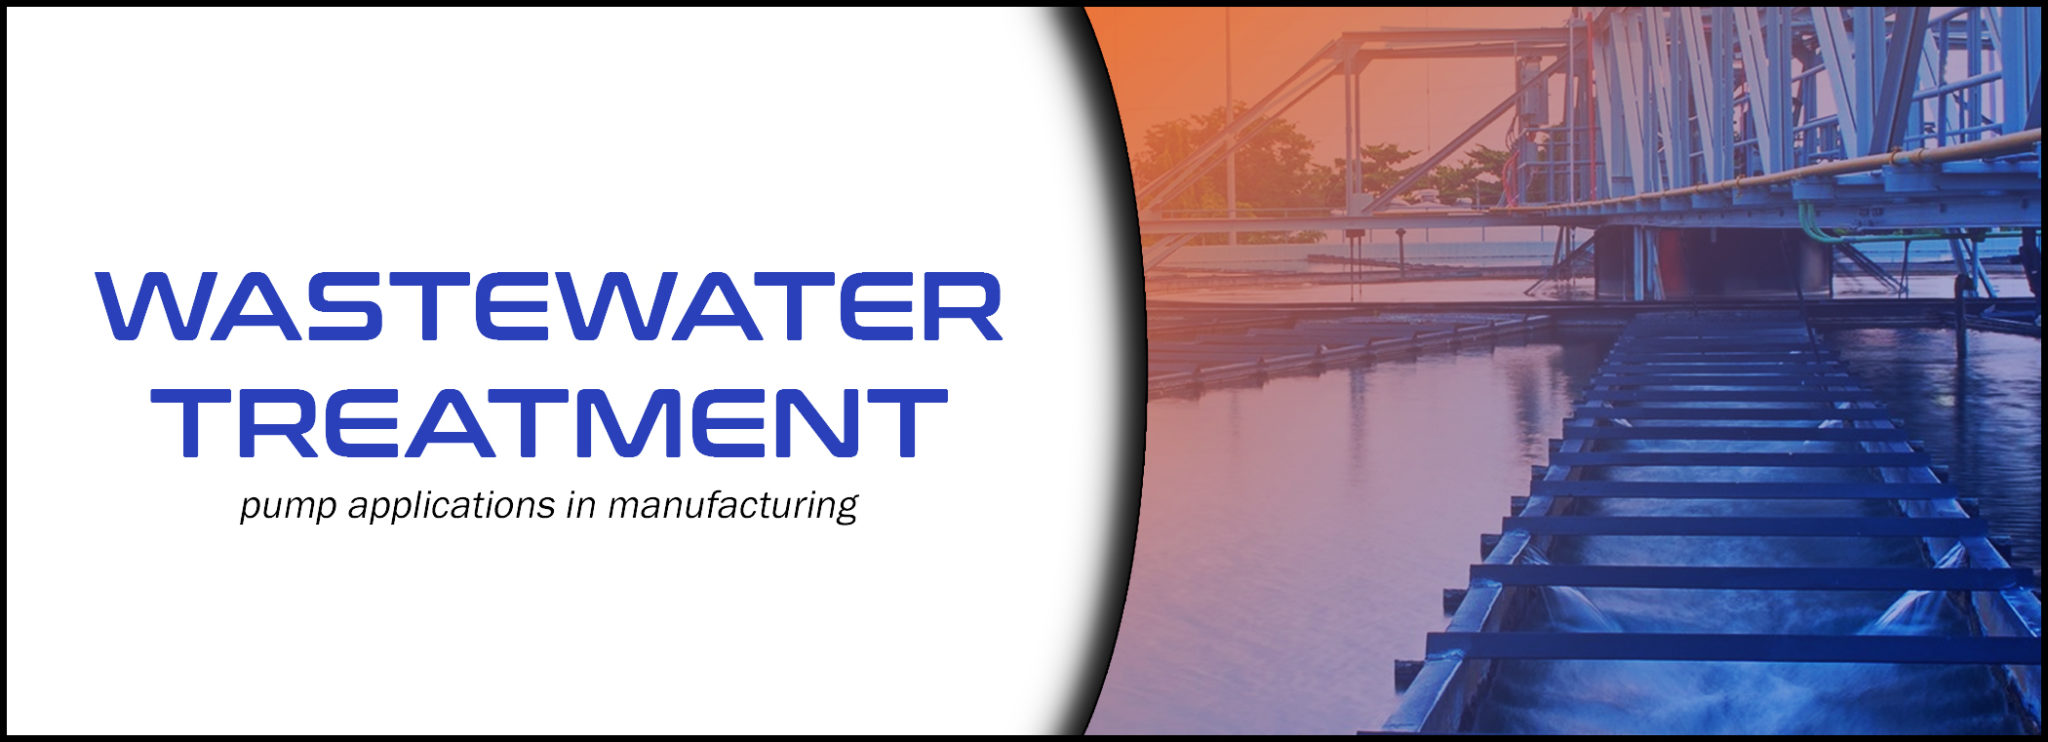 Pump Applications for Wastewater Treatment in Manufacturing